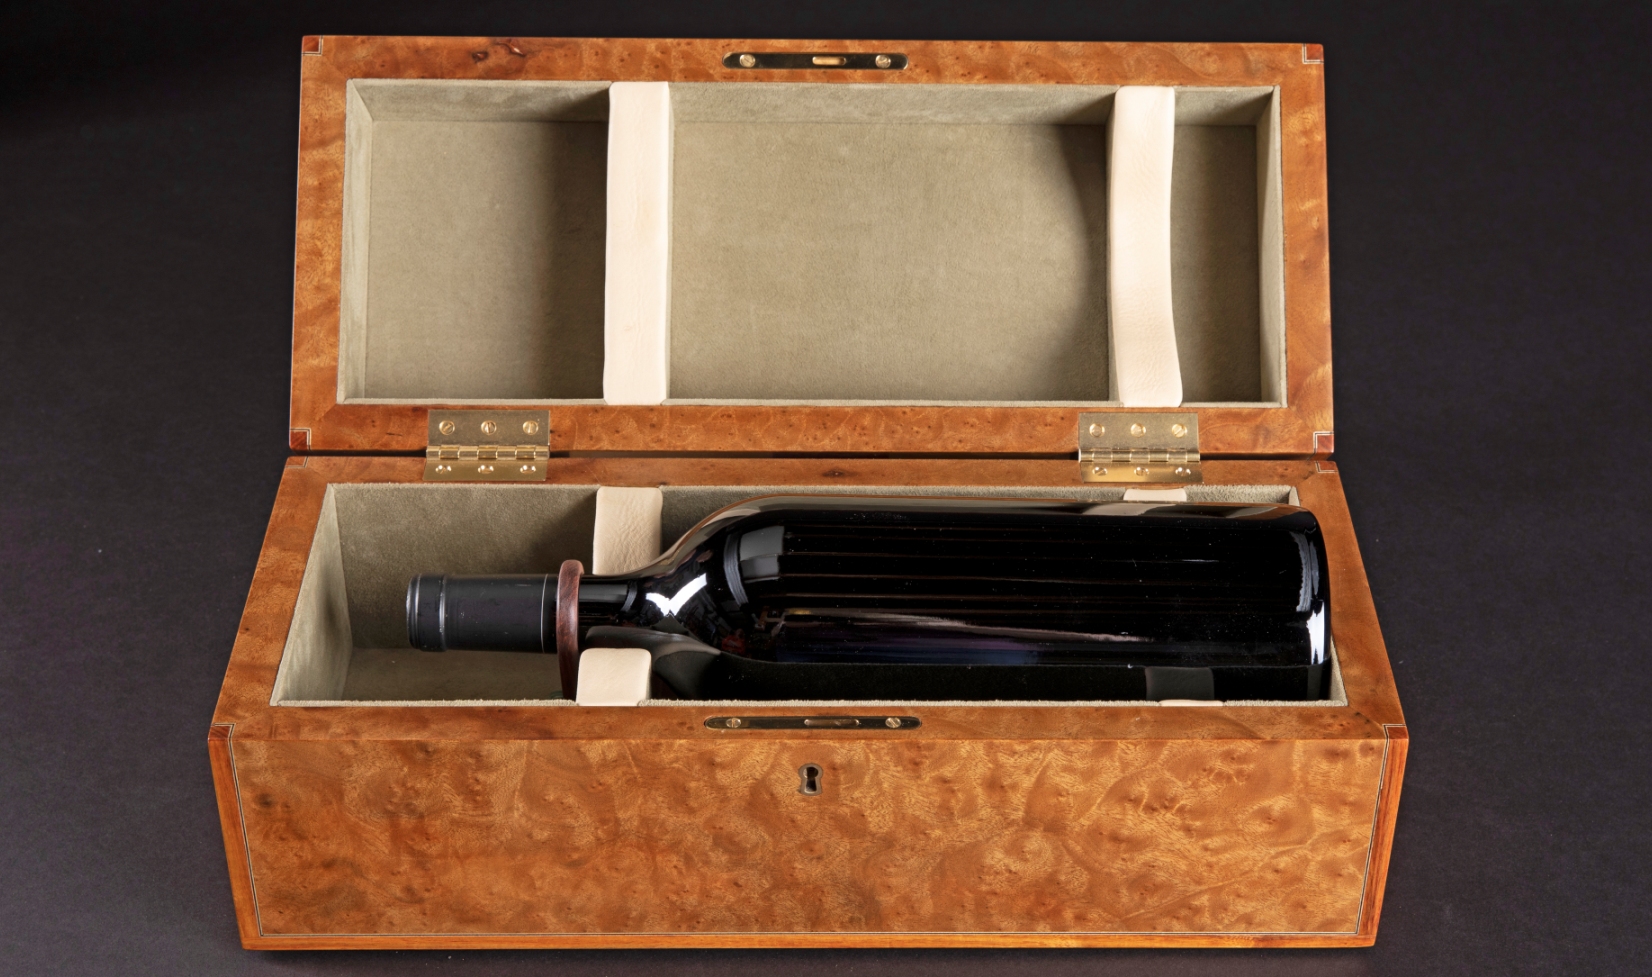 A gift for the discerning wine lover and collector: a wooden wine display case